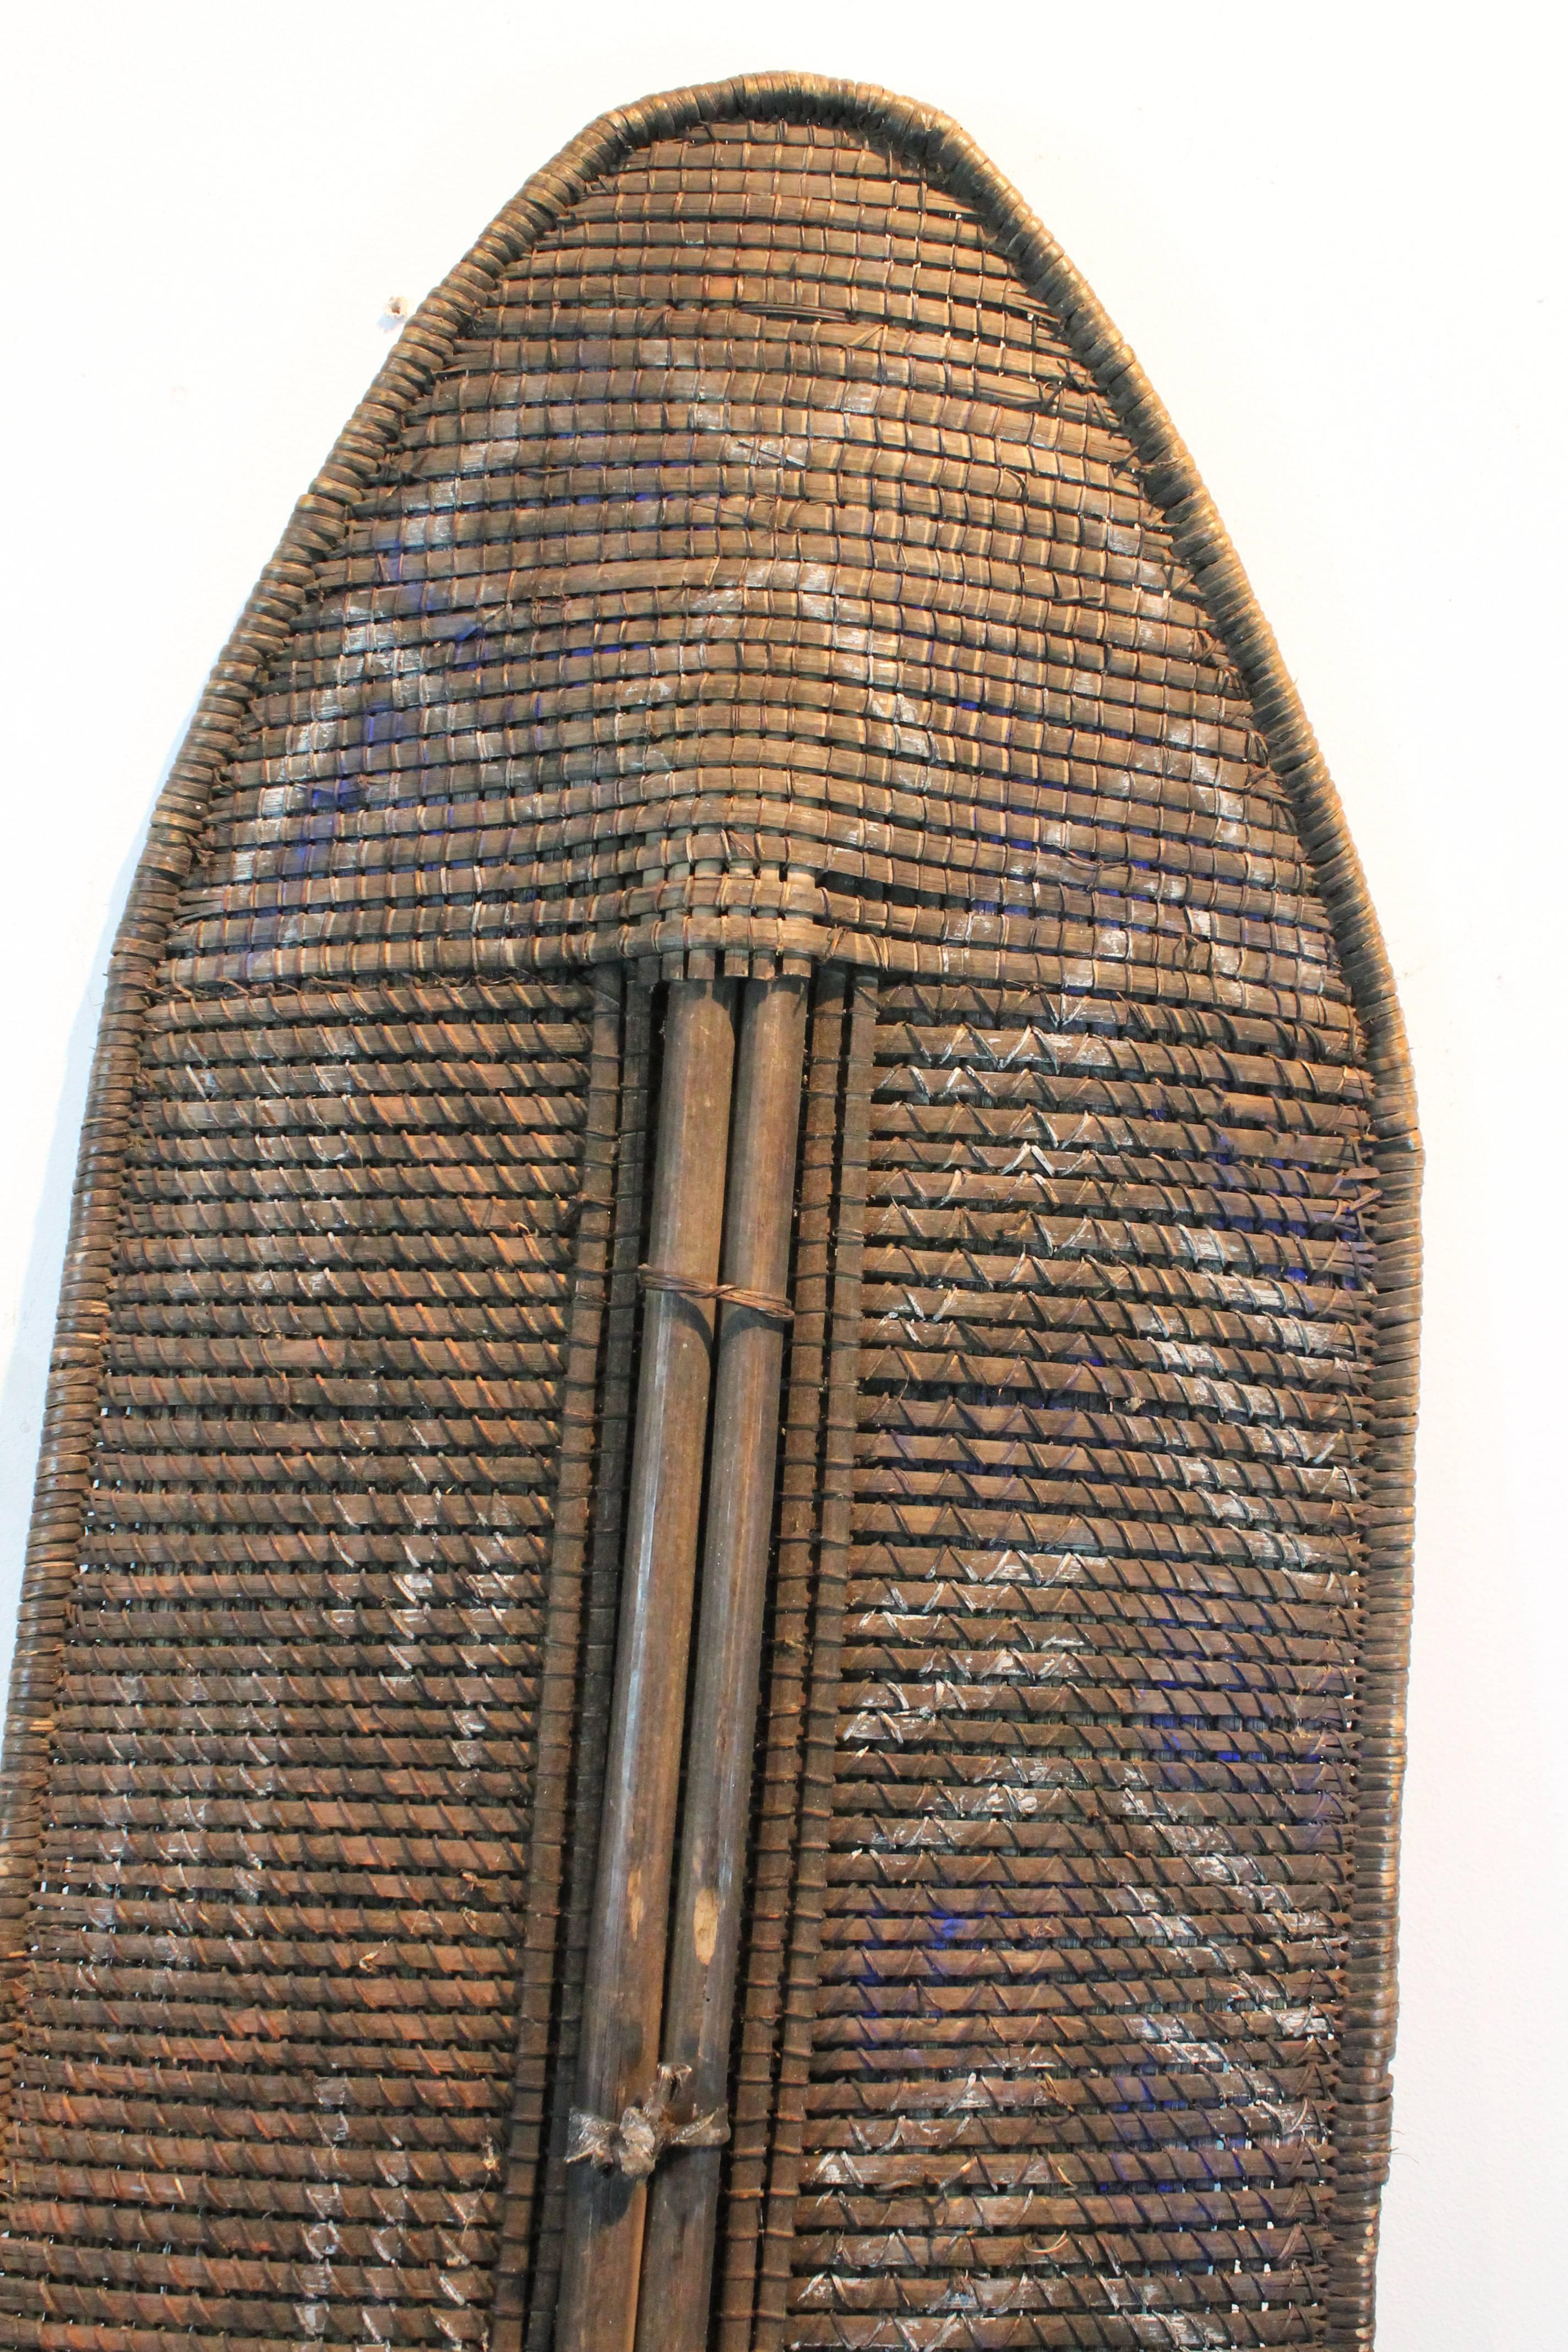 Wonderful graphic woven rattan and natural pigment shield from the Ngandu people Congo.